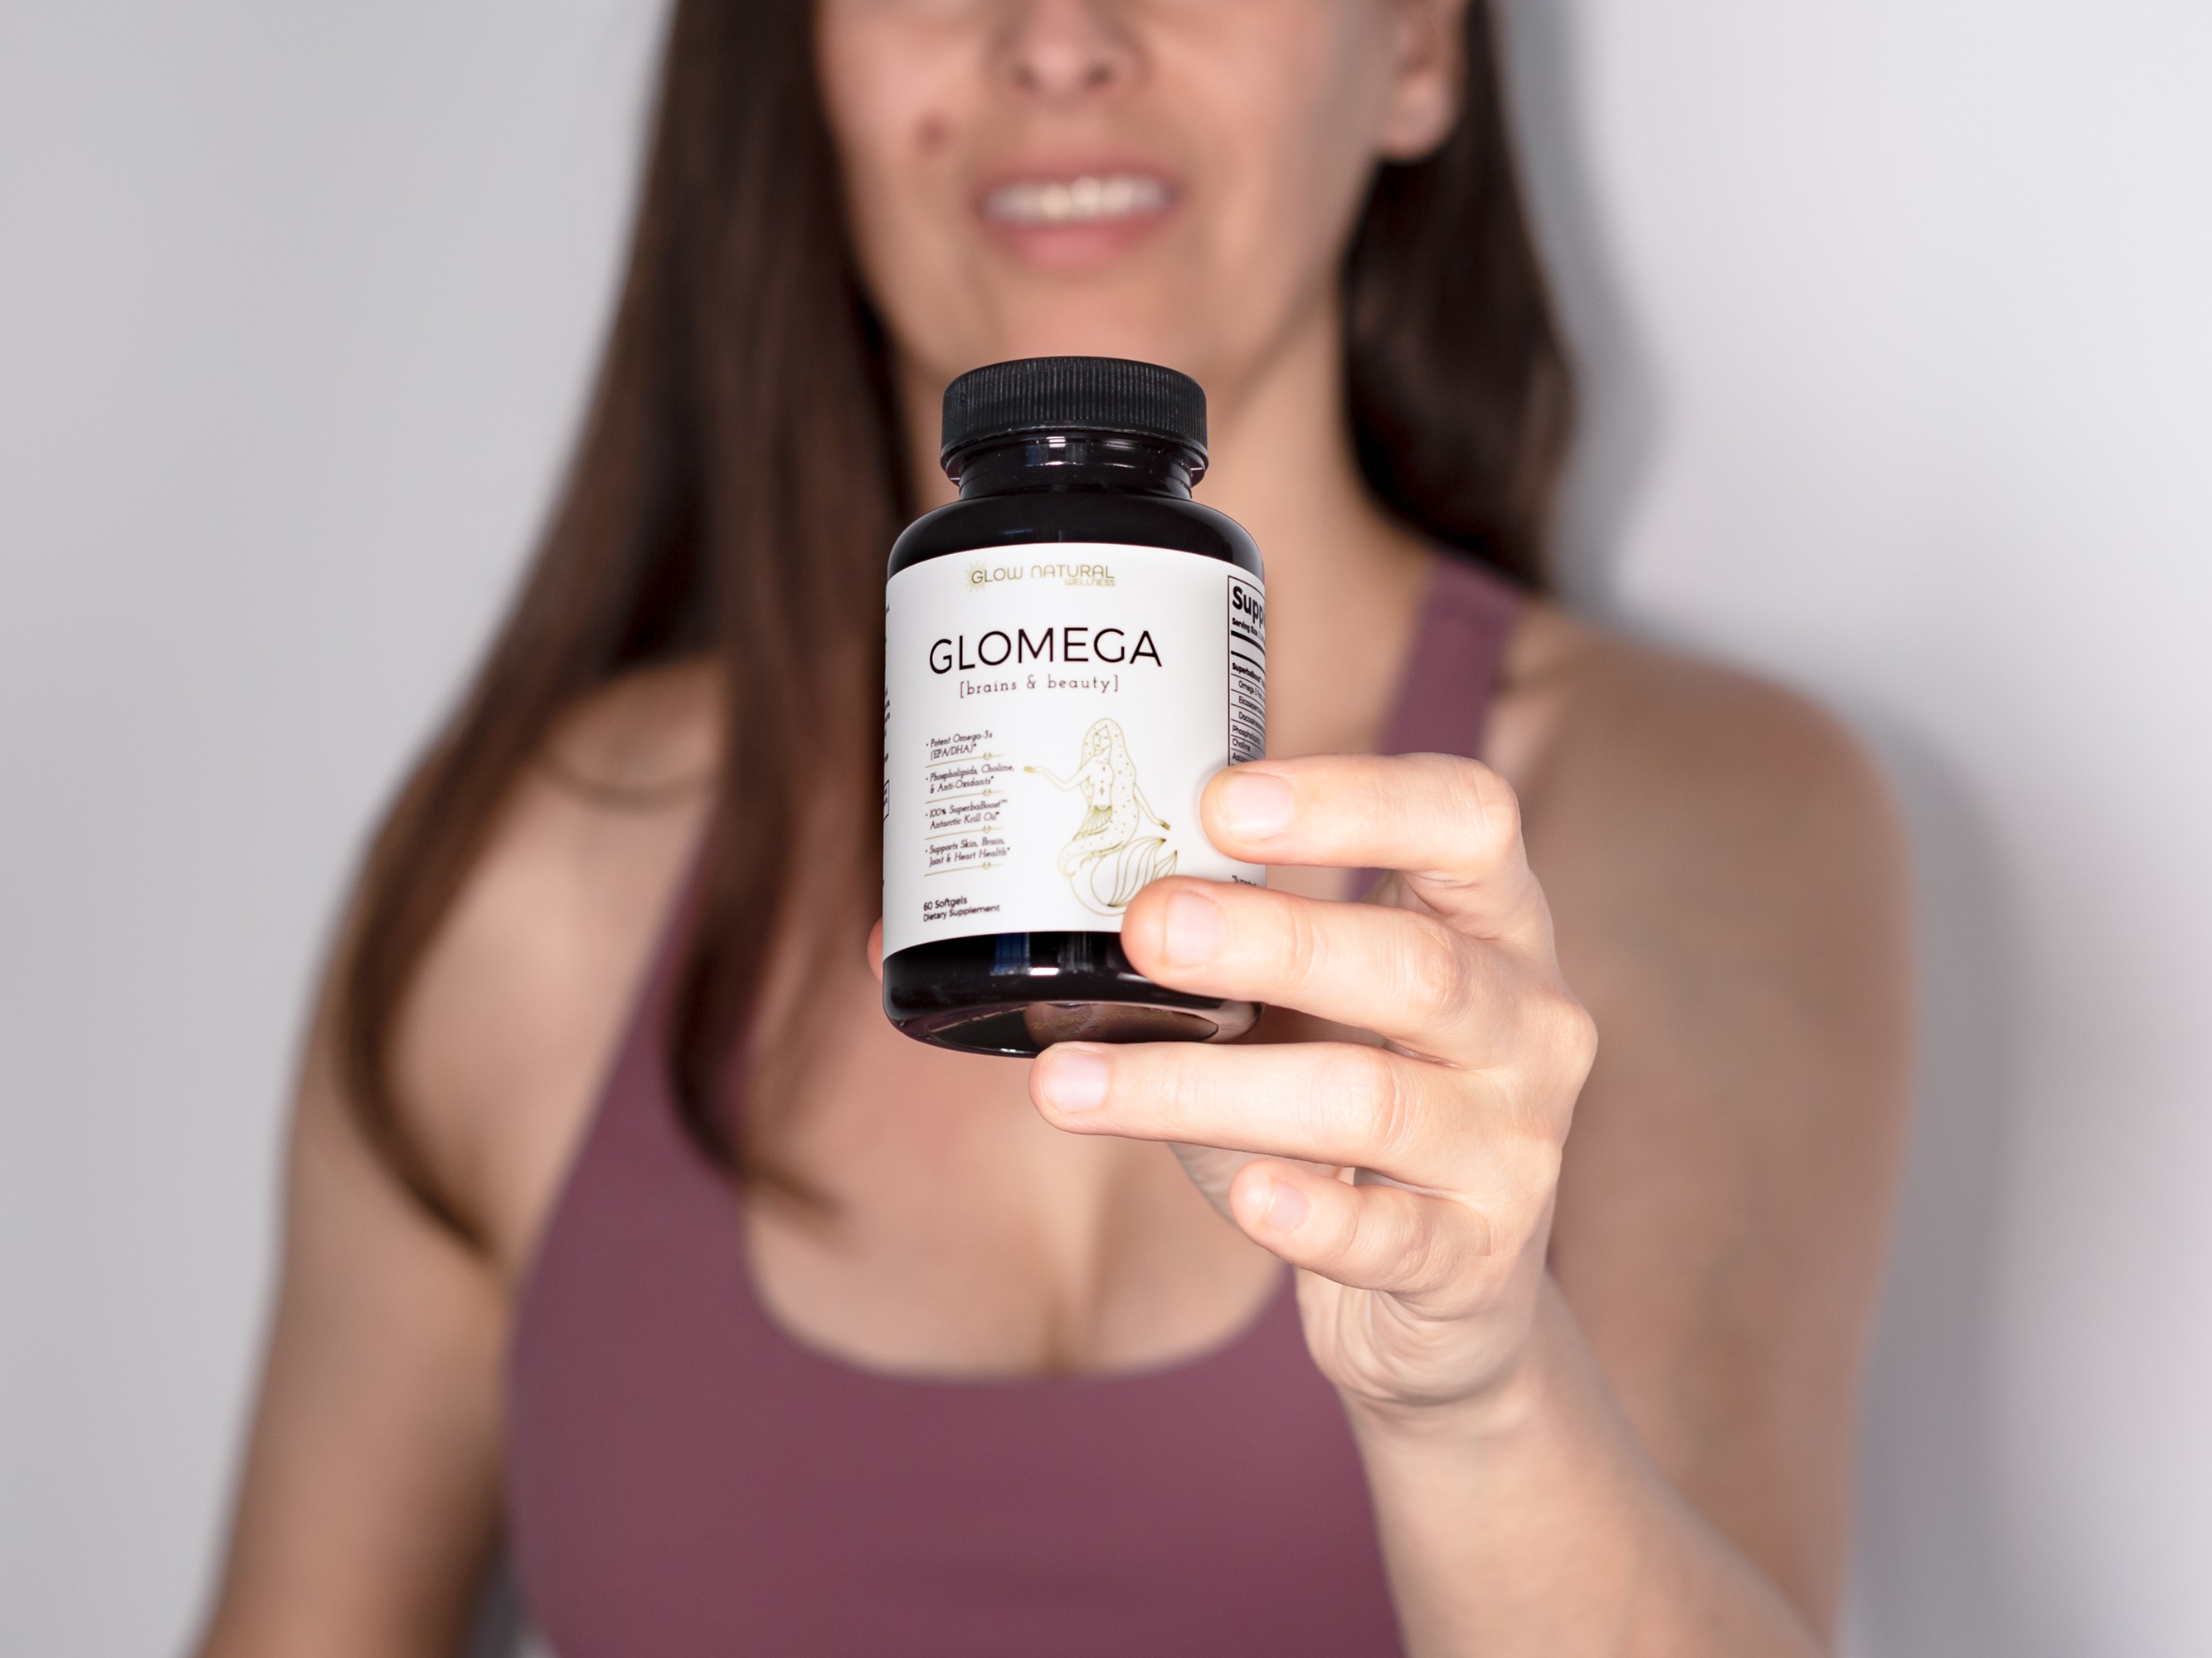 Woman holding a bottle of Glomega omega-3 supplements.